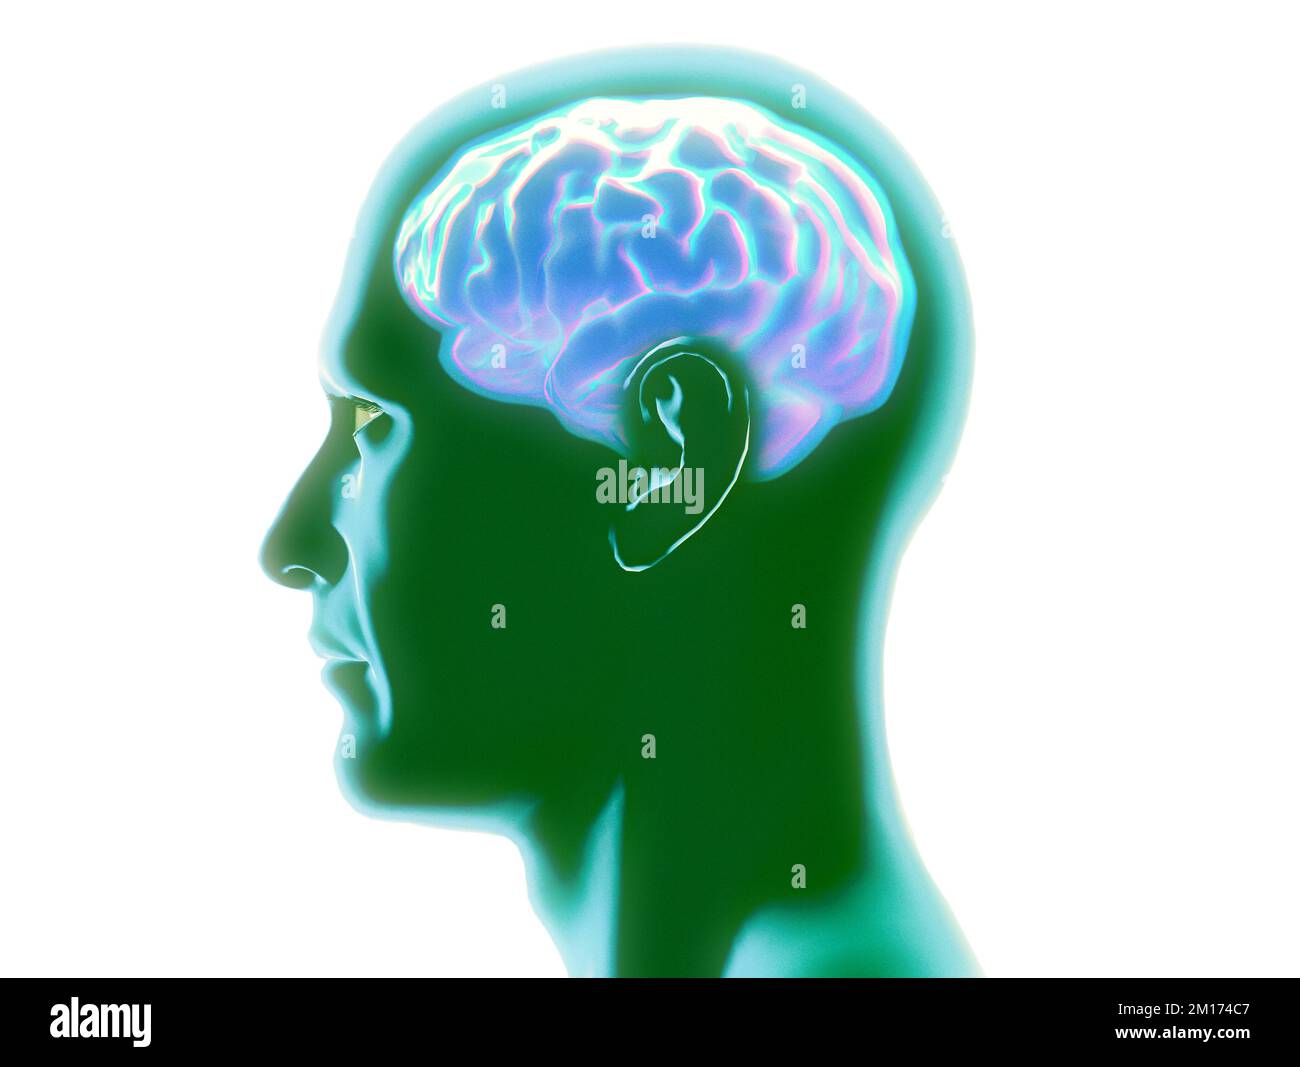 Neurology, philosophy: connections, the development of thought and reflection, the infinite possibilities of the brain and mind. Human anatomy Stock Photo